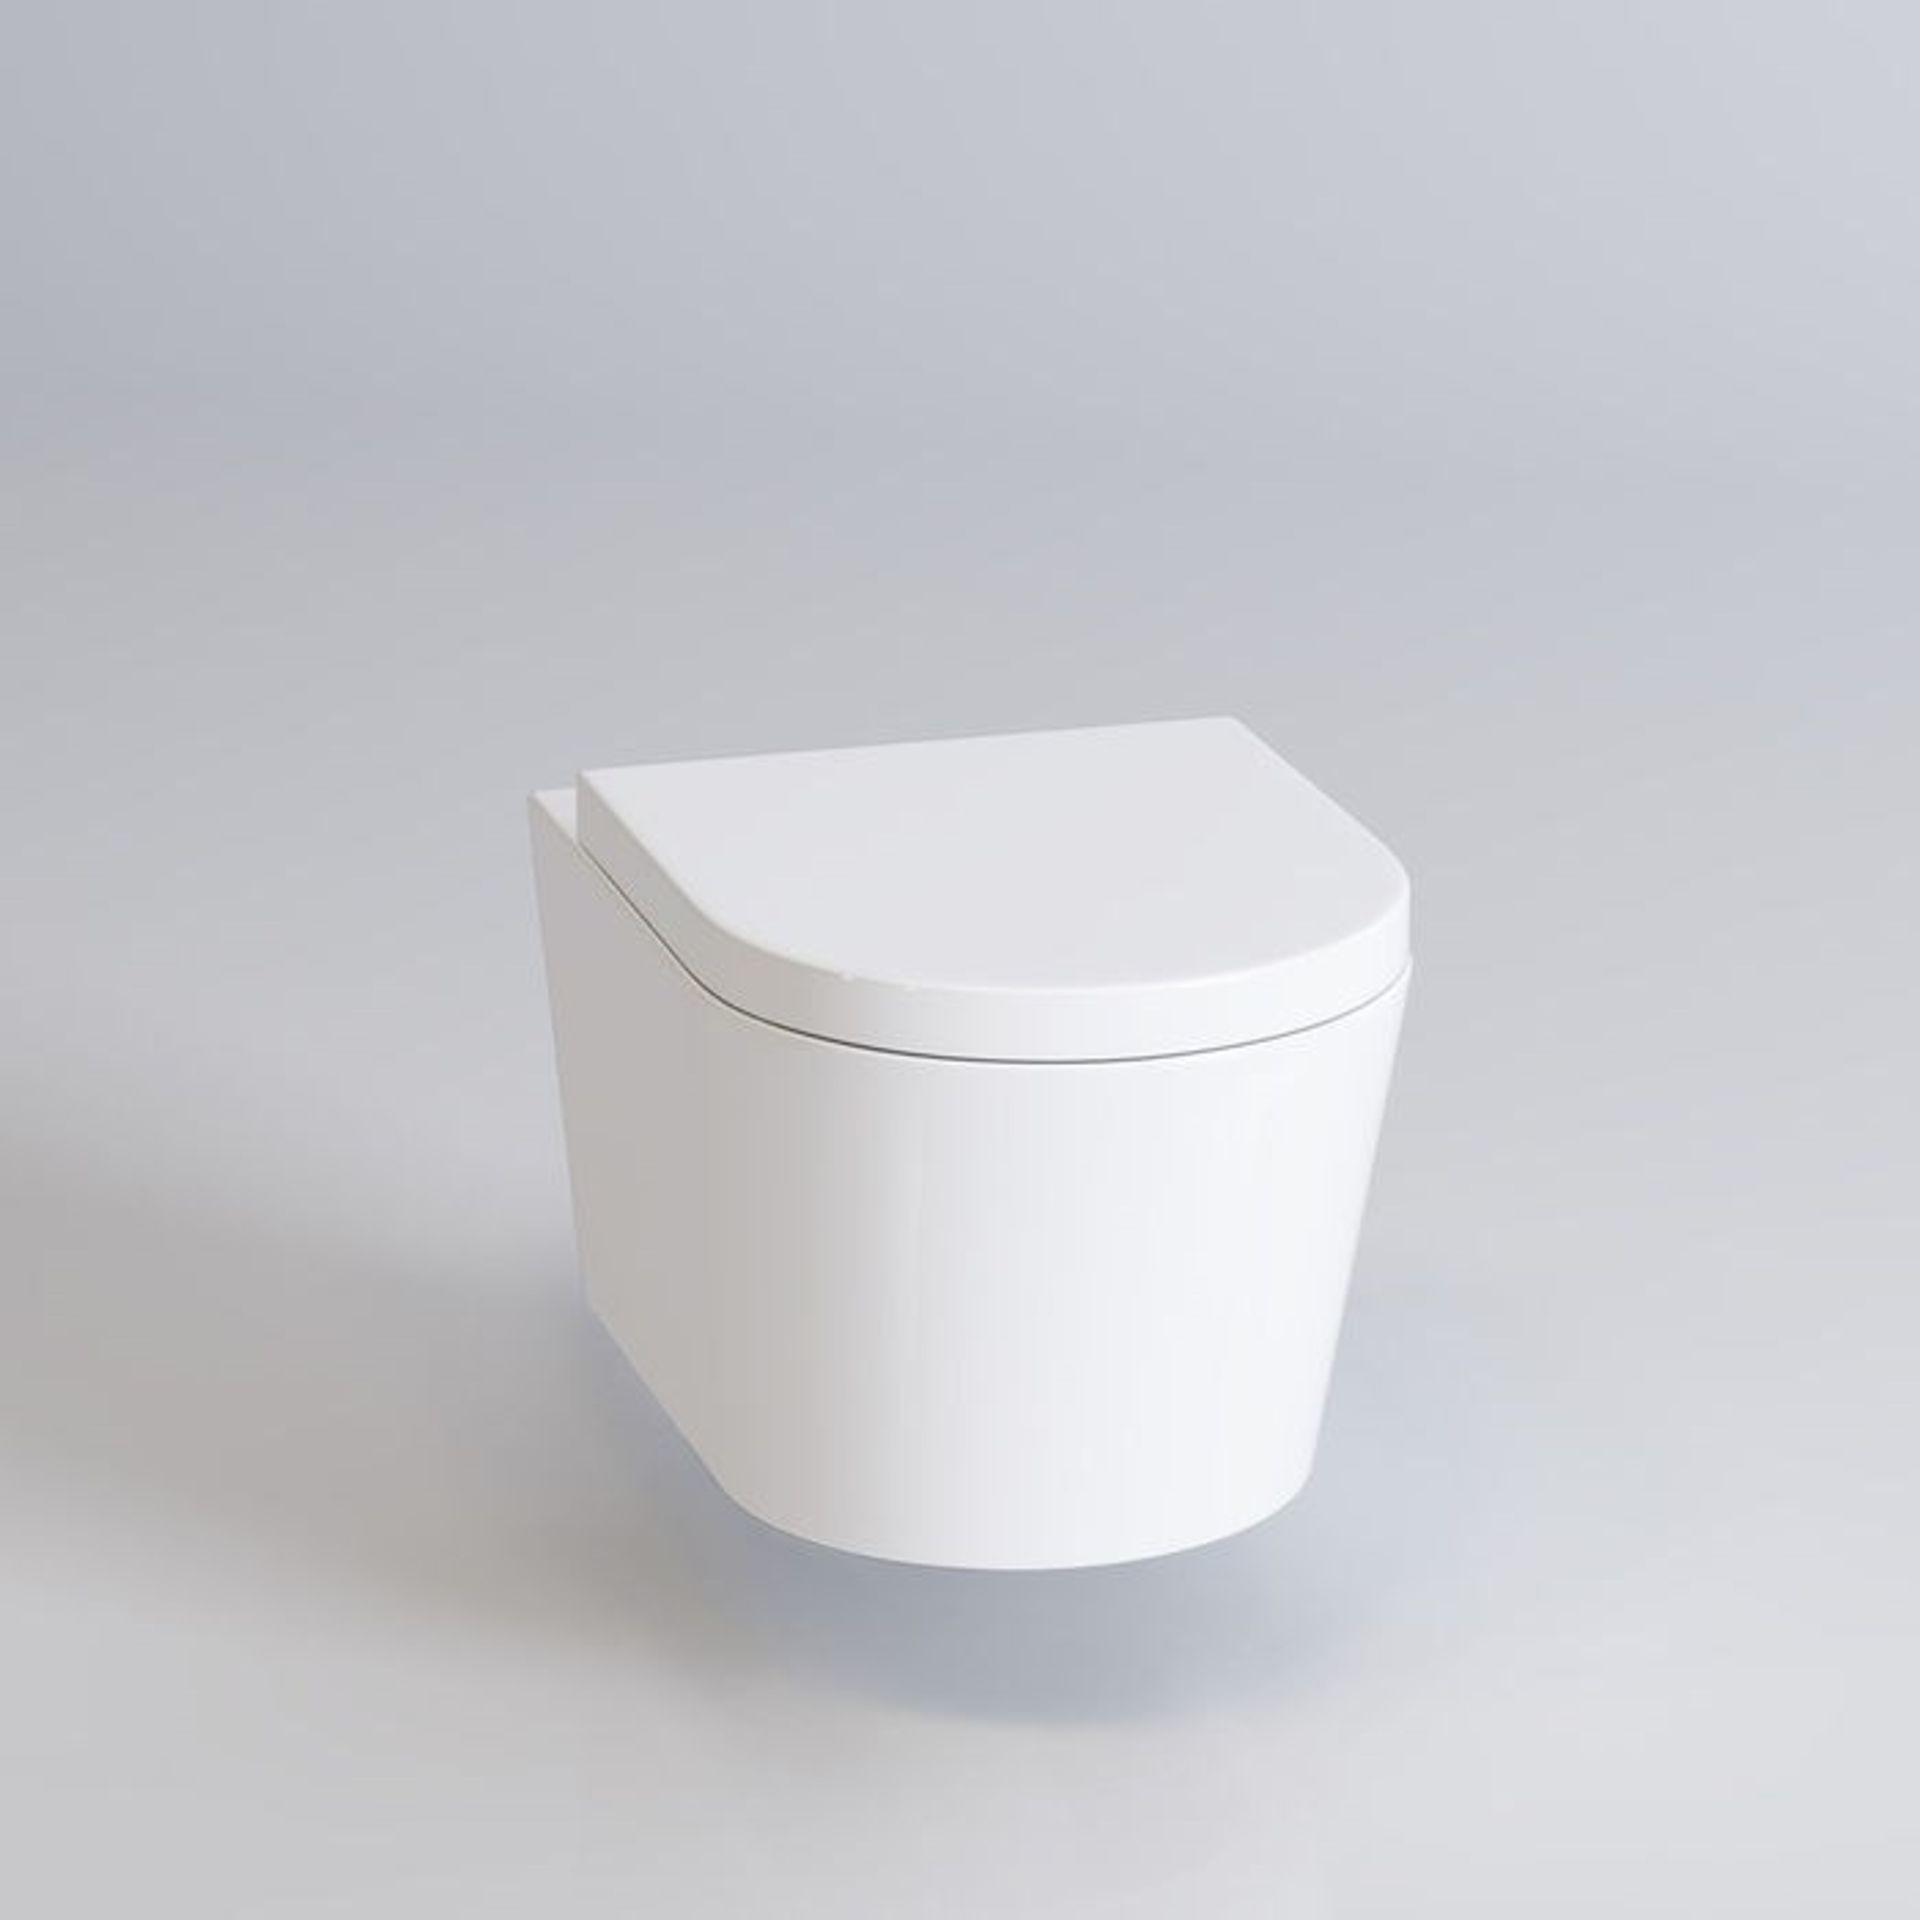 5 BRAND NEW BOXED Lyon II Wall Hung Toilet inc Luxury Soft Close Seat. RRP £349.99.We love this - Image 3 of 3